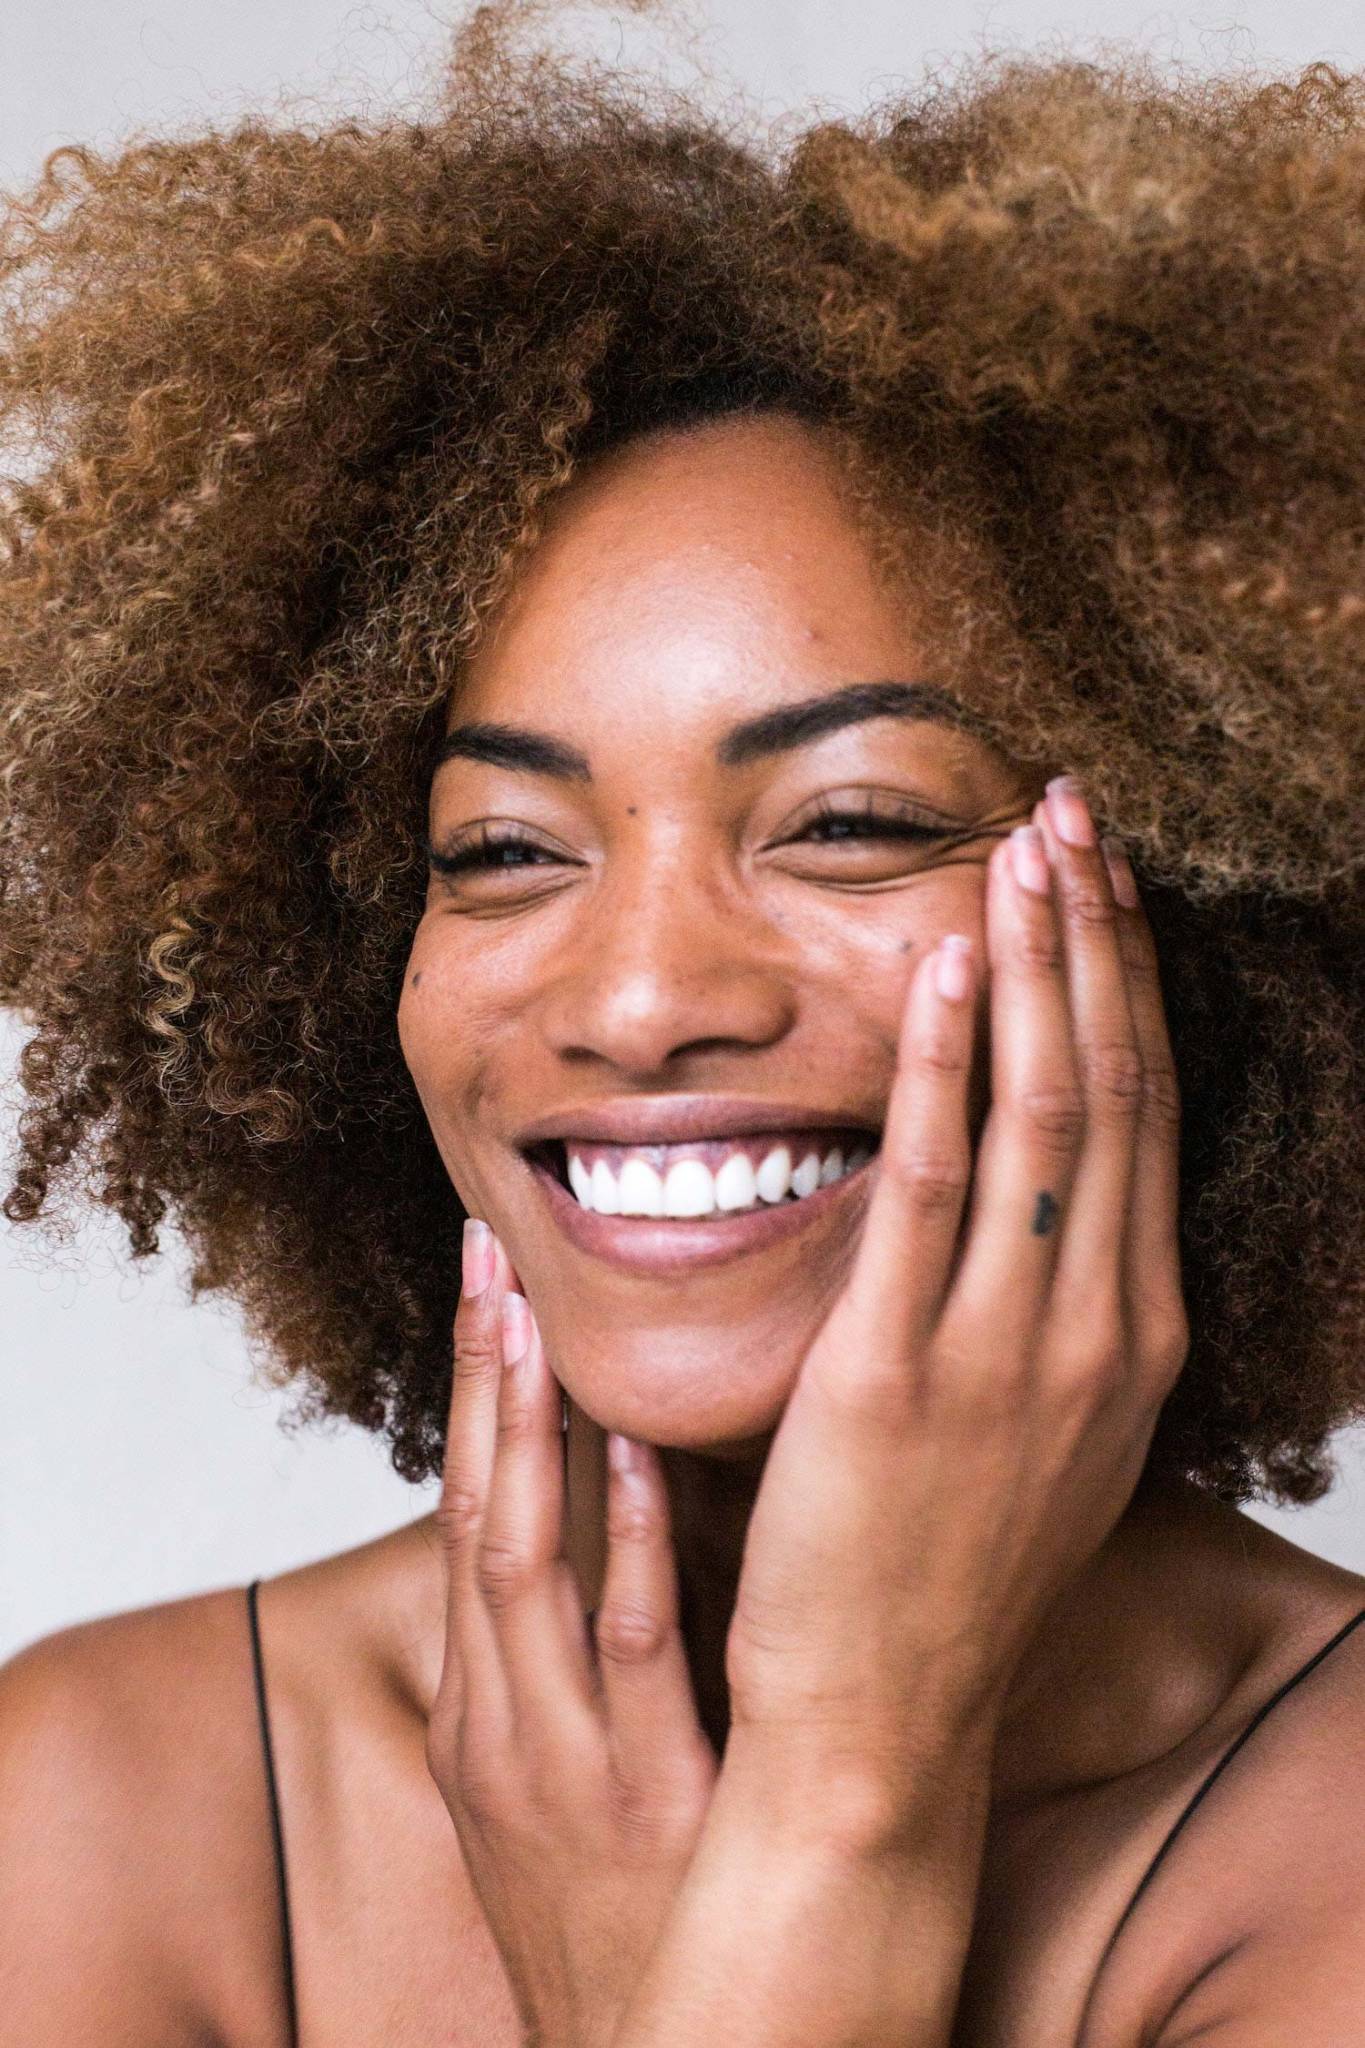 Smiling African American woman with her hands on her face